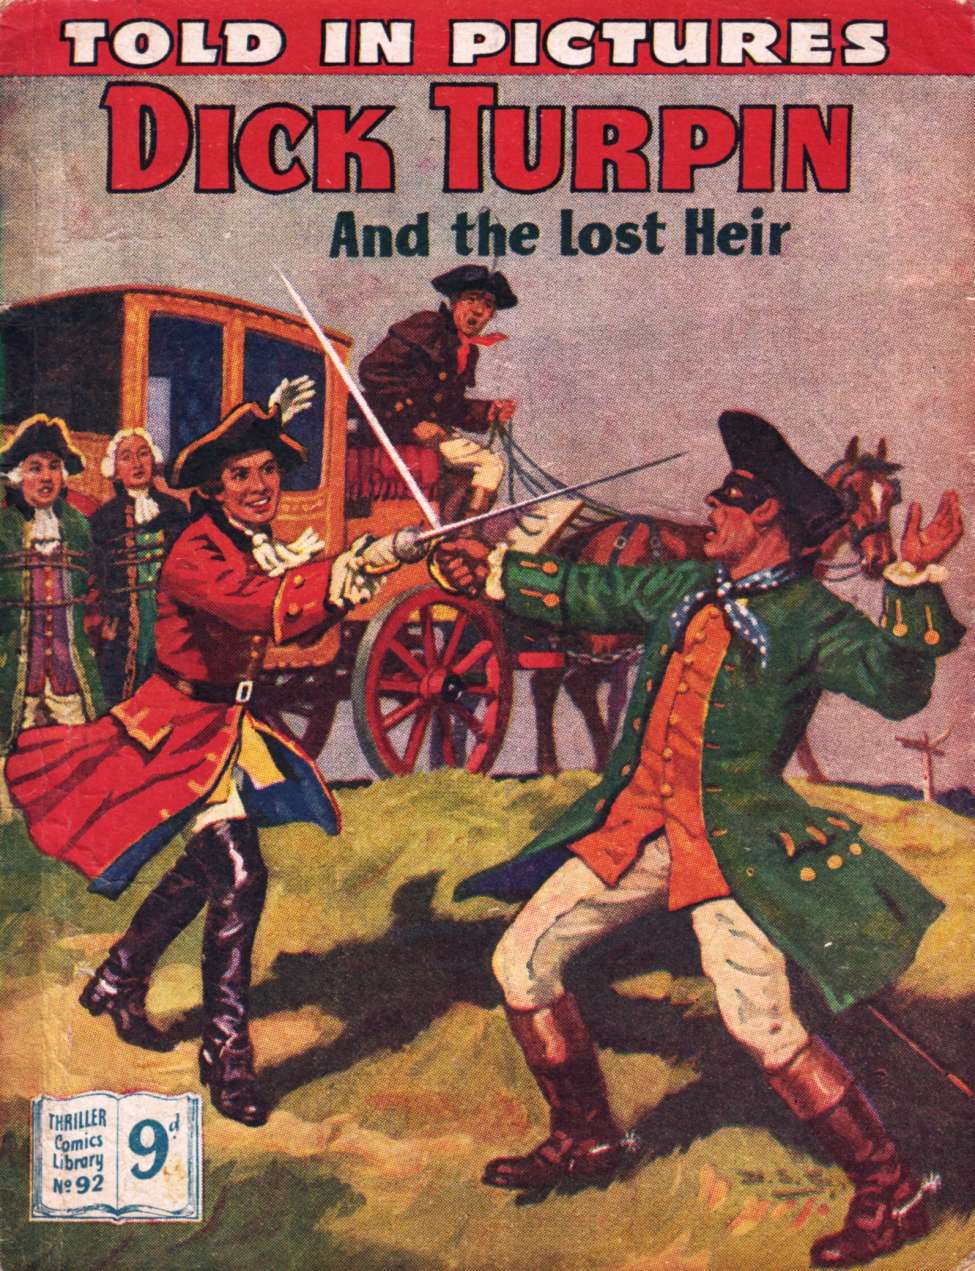 Comic Book Cover For Thriller Comics Library 92 - Dick Turpin and the Lost Heir